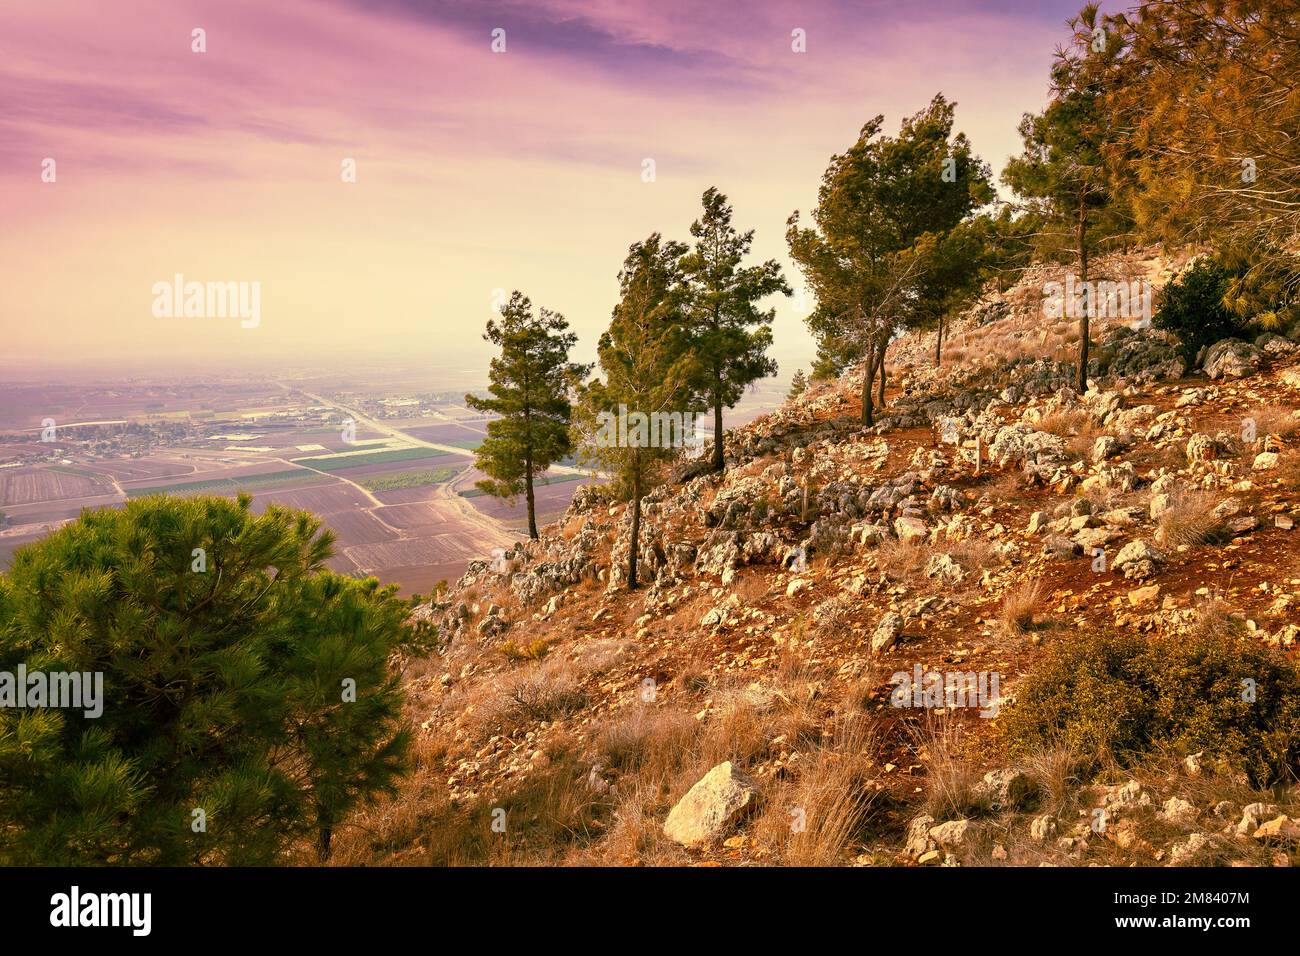 Slope of Mount Precipice in autumn, Lower Galilee, Israel Stock Photo